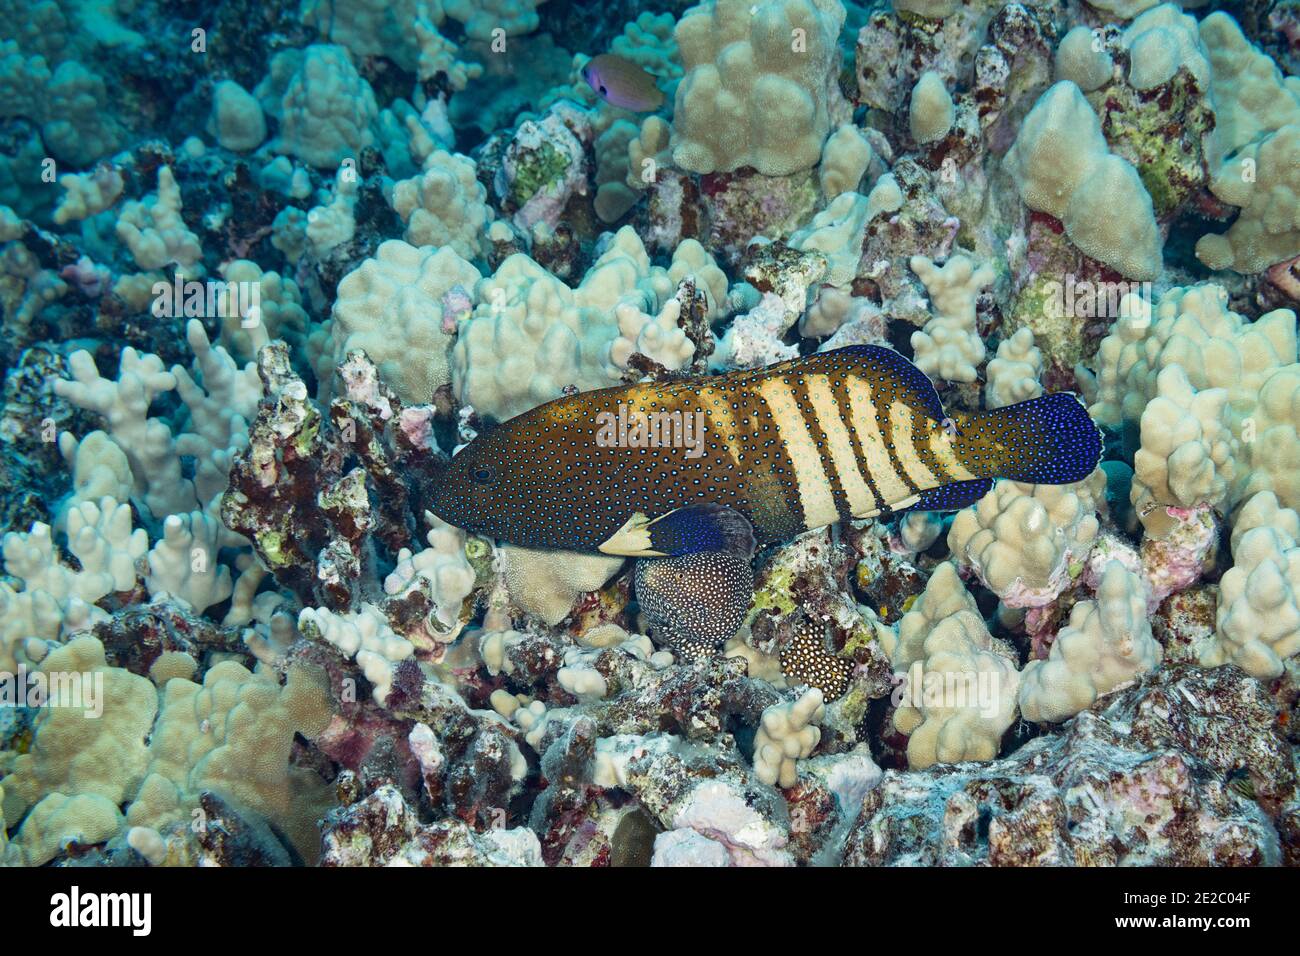 Hunting coalition of peacock grouper and  whitemouth moray eel. Grouper gently strokes eel with pec fin to encourage it to start hunting. Kona, Hawaii Stock Photo